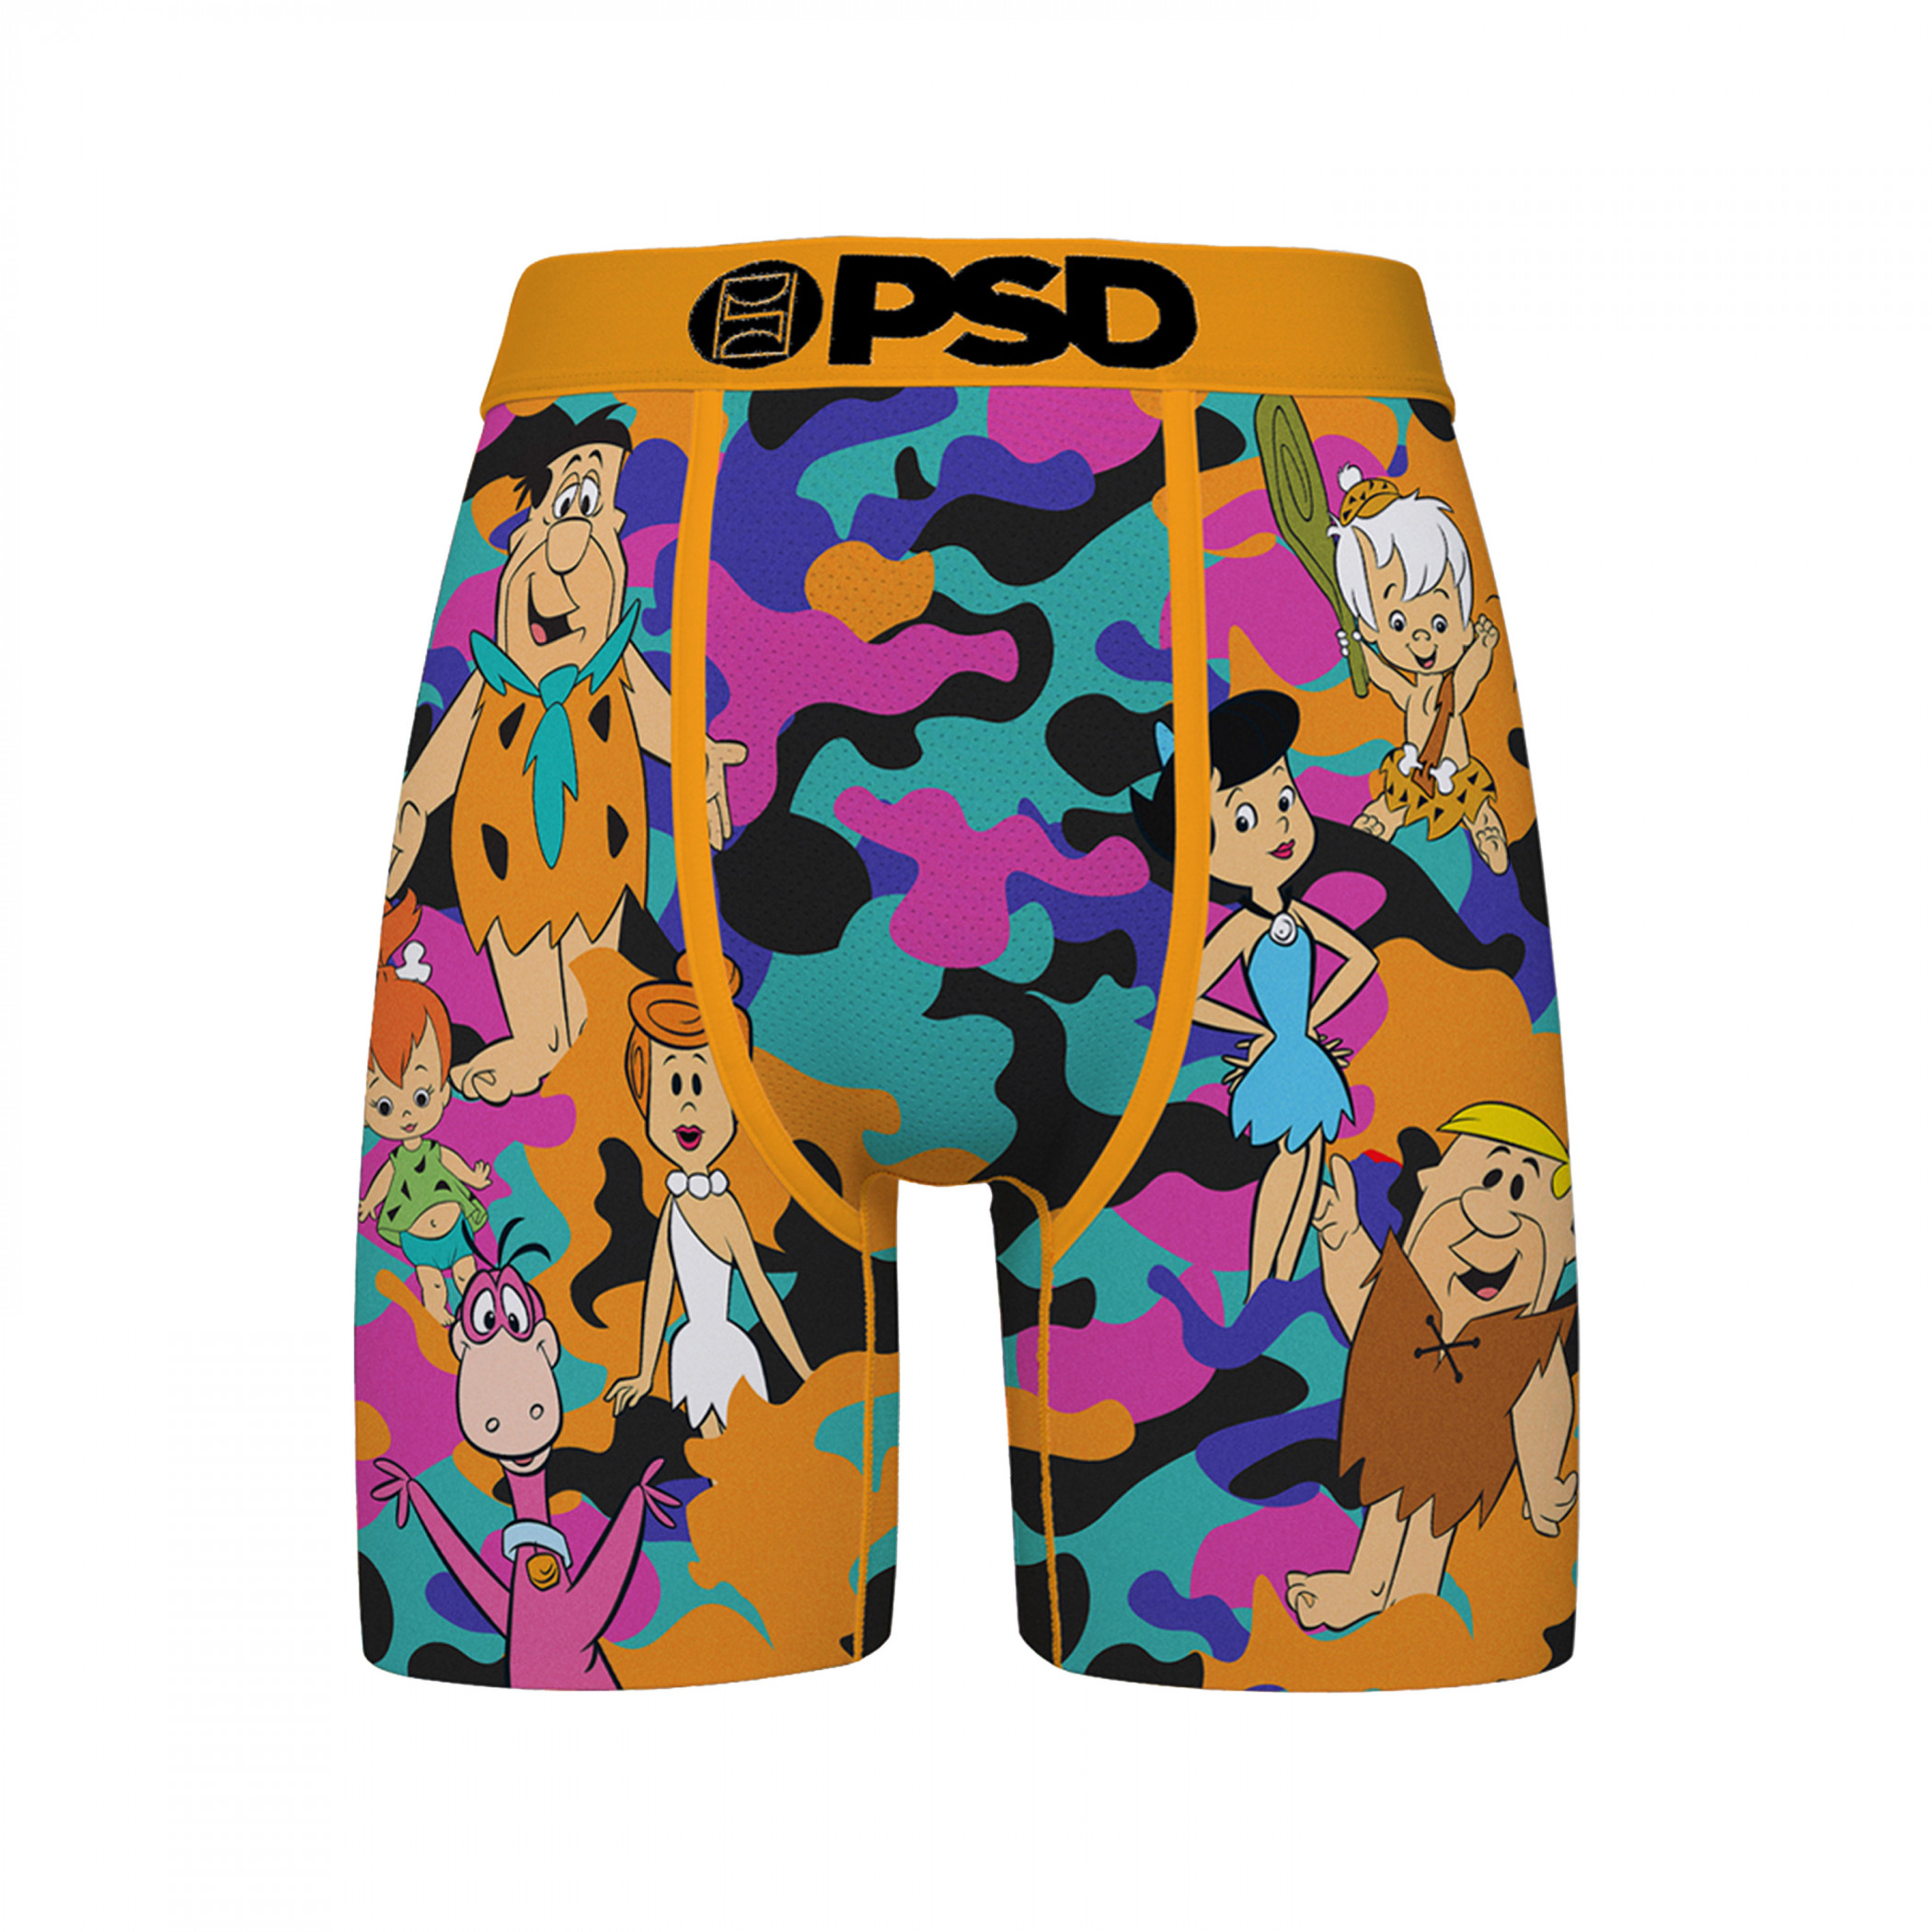 Post Fruity Pebbles Cereal Box Style Swag Boxer Briefs